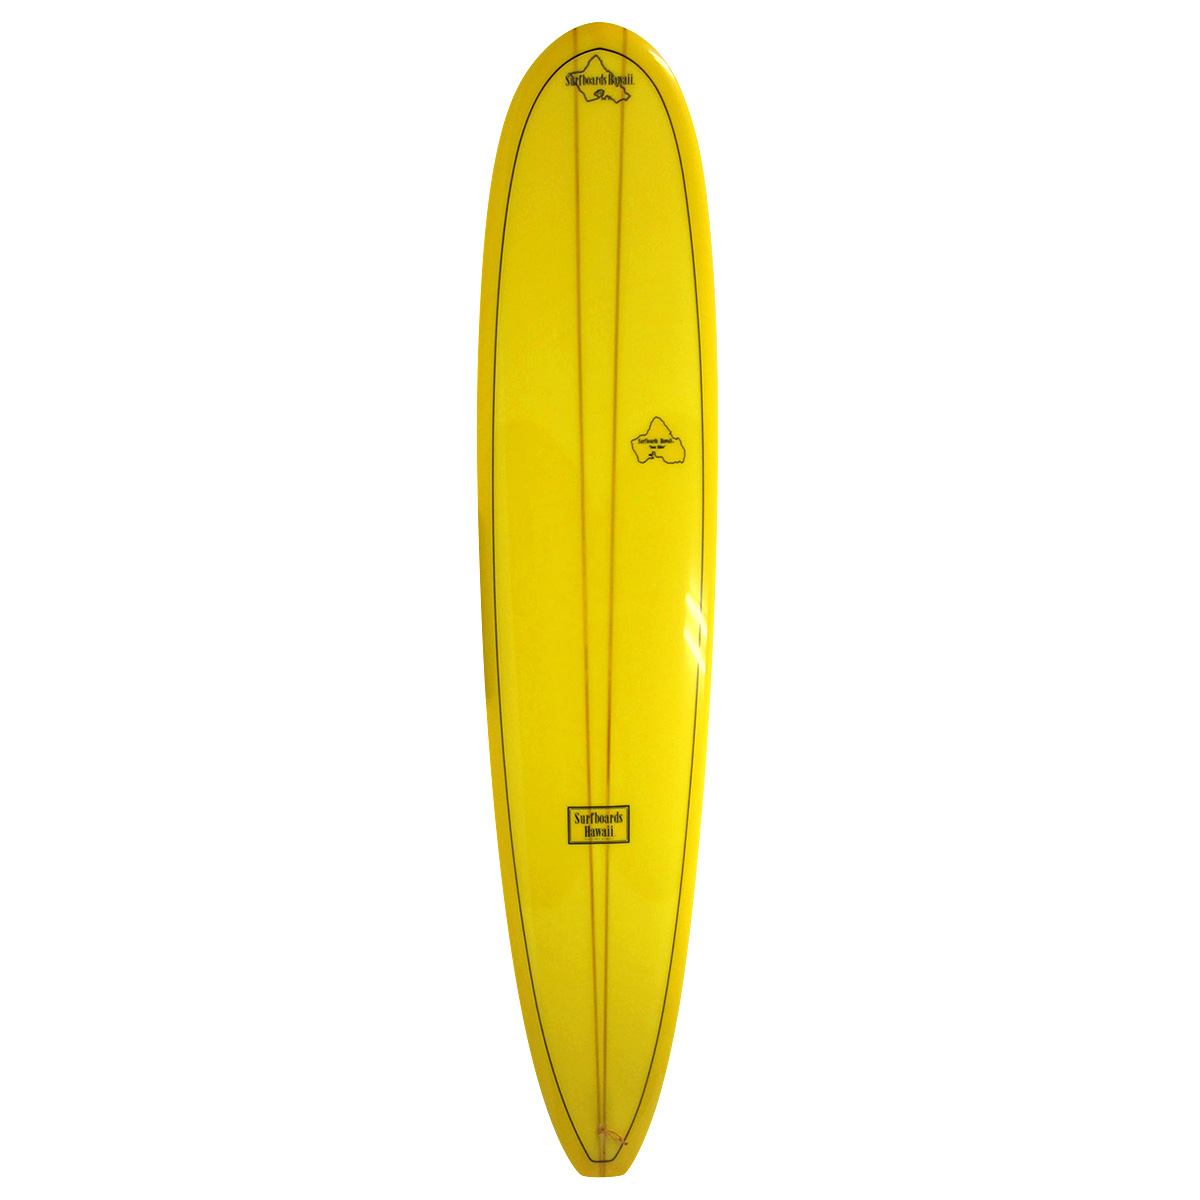 Surfboards Hawaii / 9'6 Nose Rider Shaped by Greg Griffin